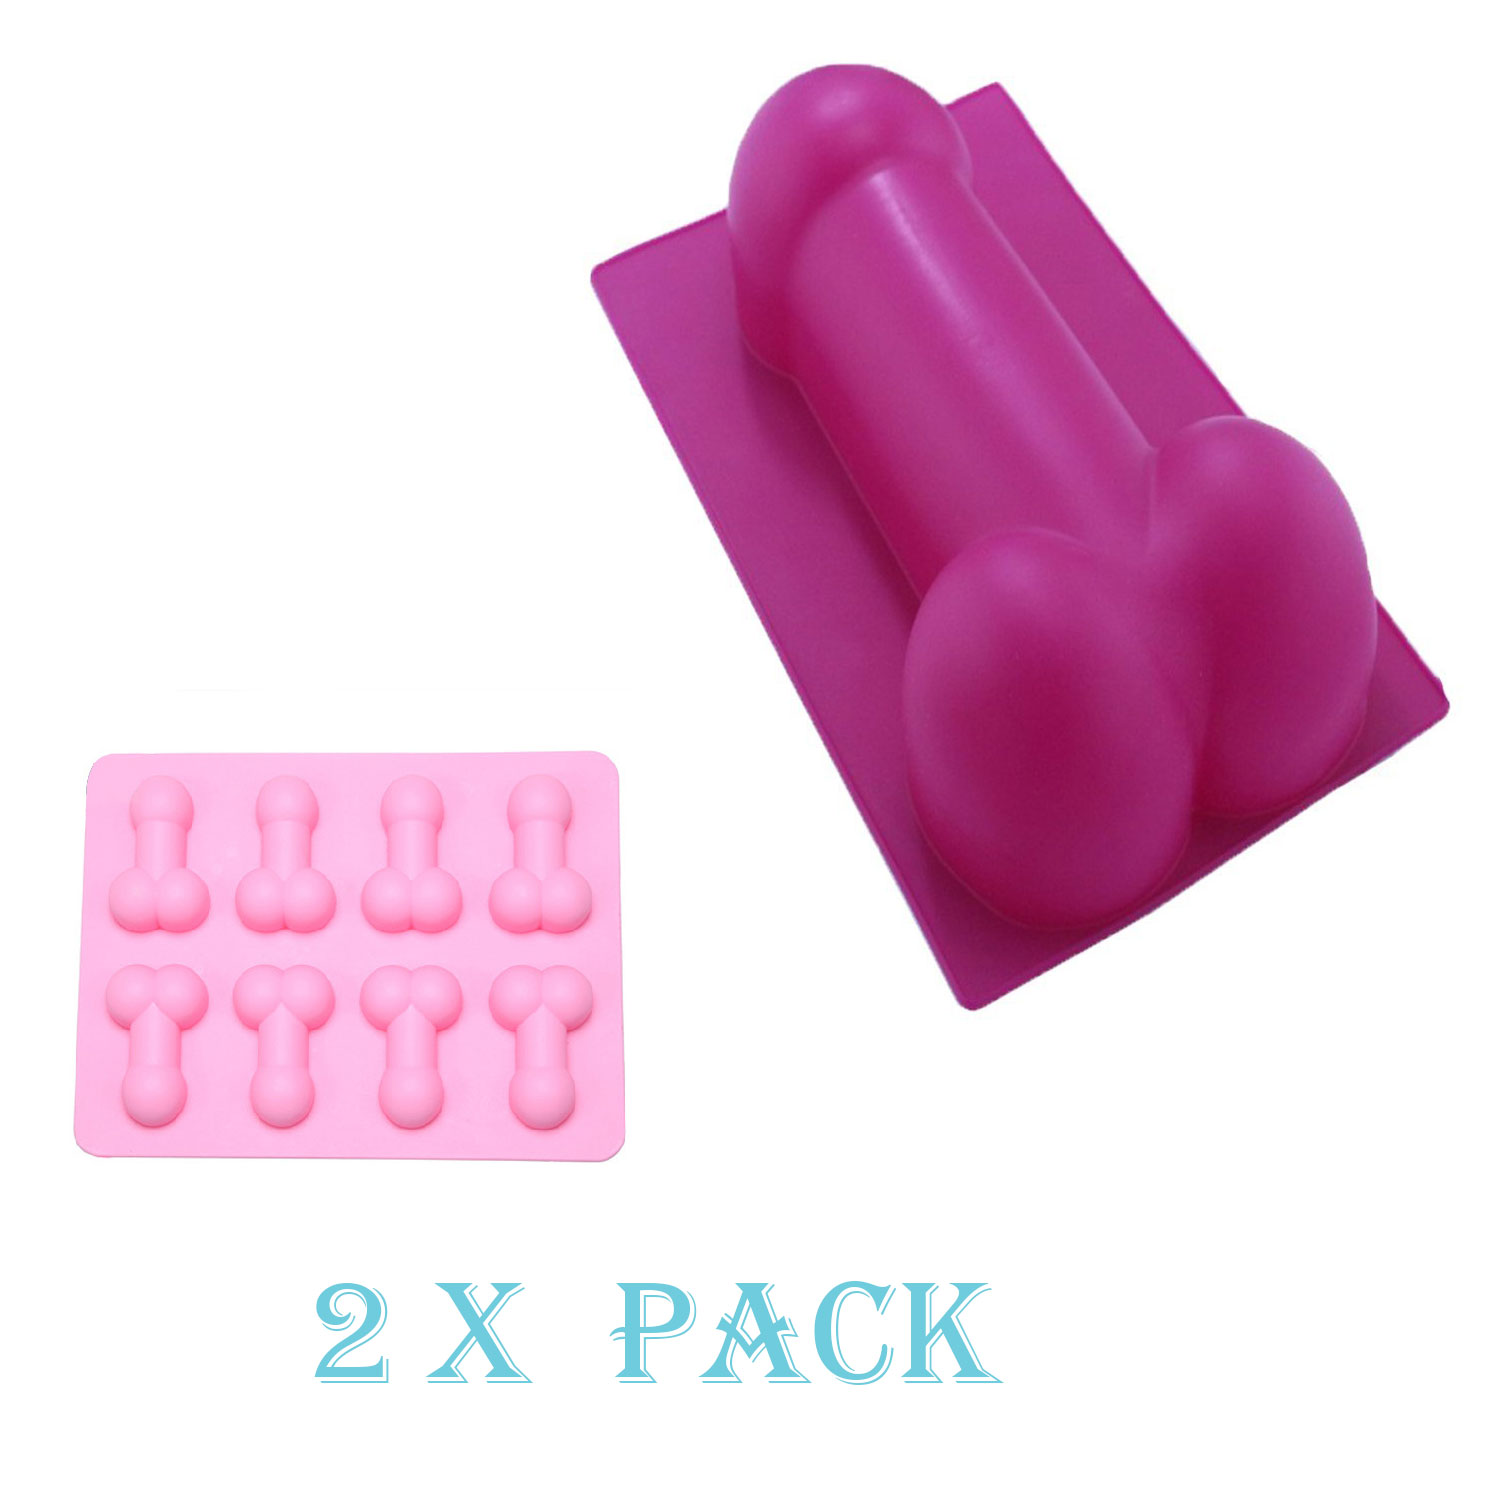 Set of two Penis Molds Silicone Chocolate, Candy, Gummy Mold and Cake